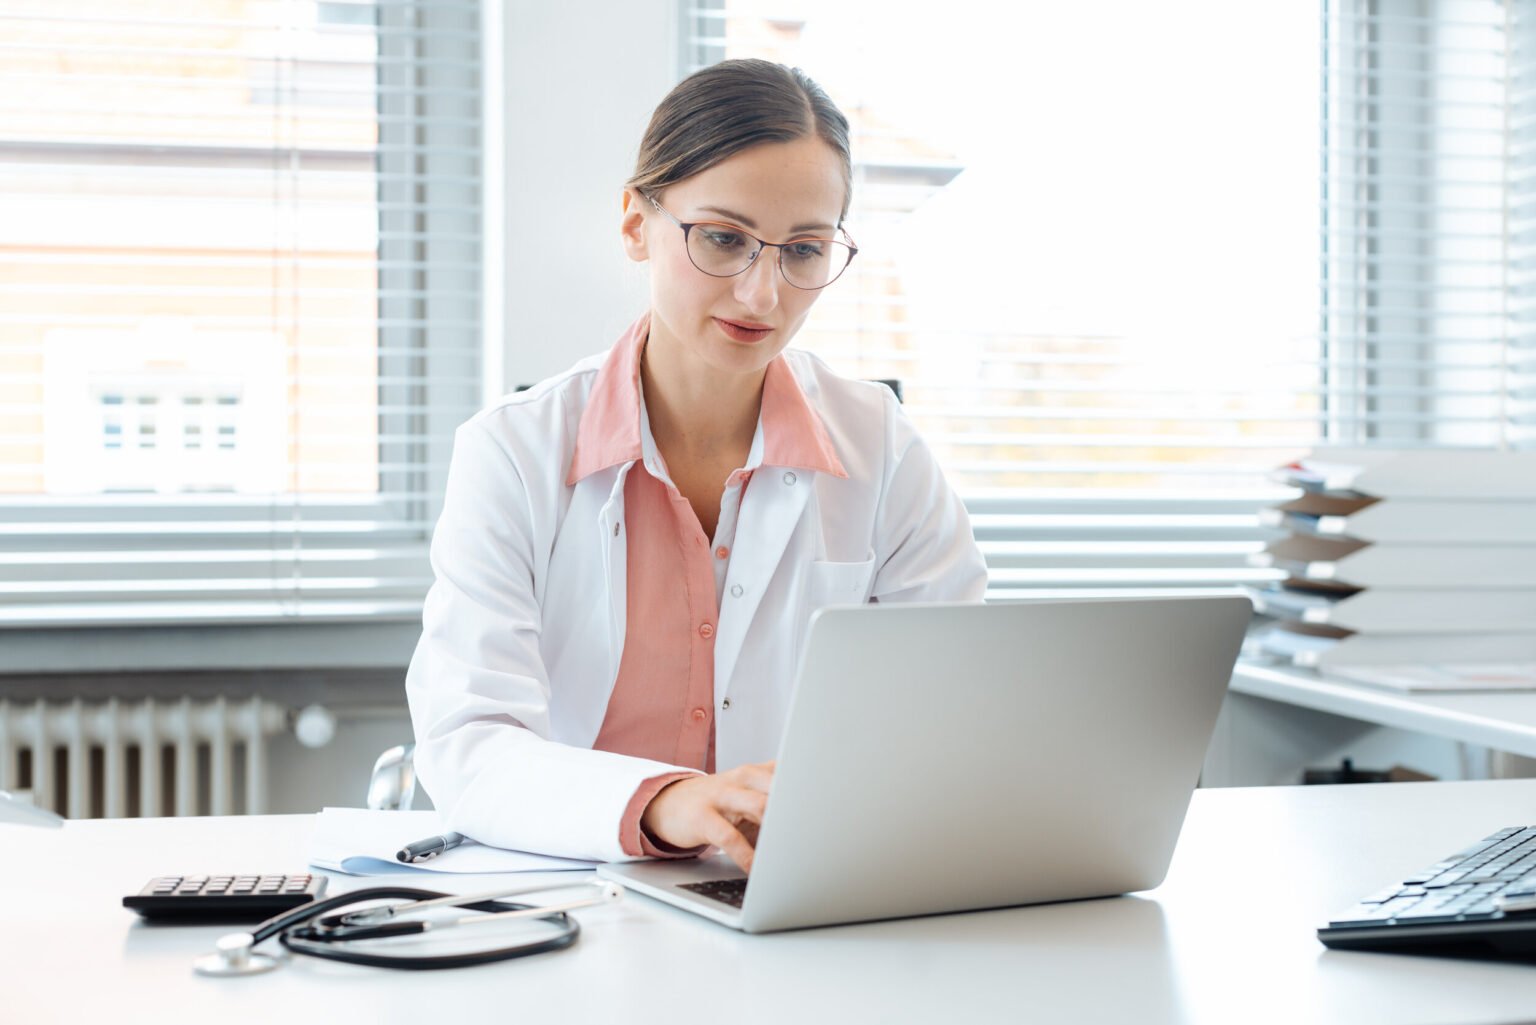 Everything you need to know about billing and coding for telehealth